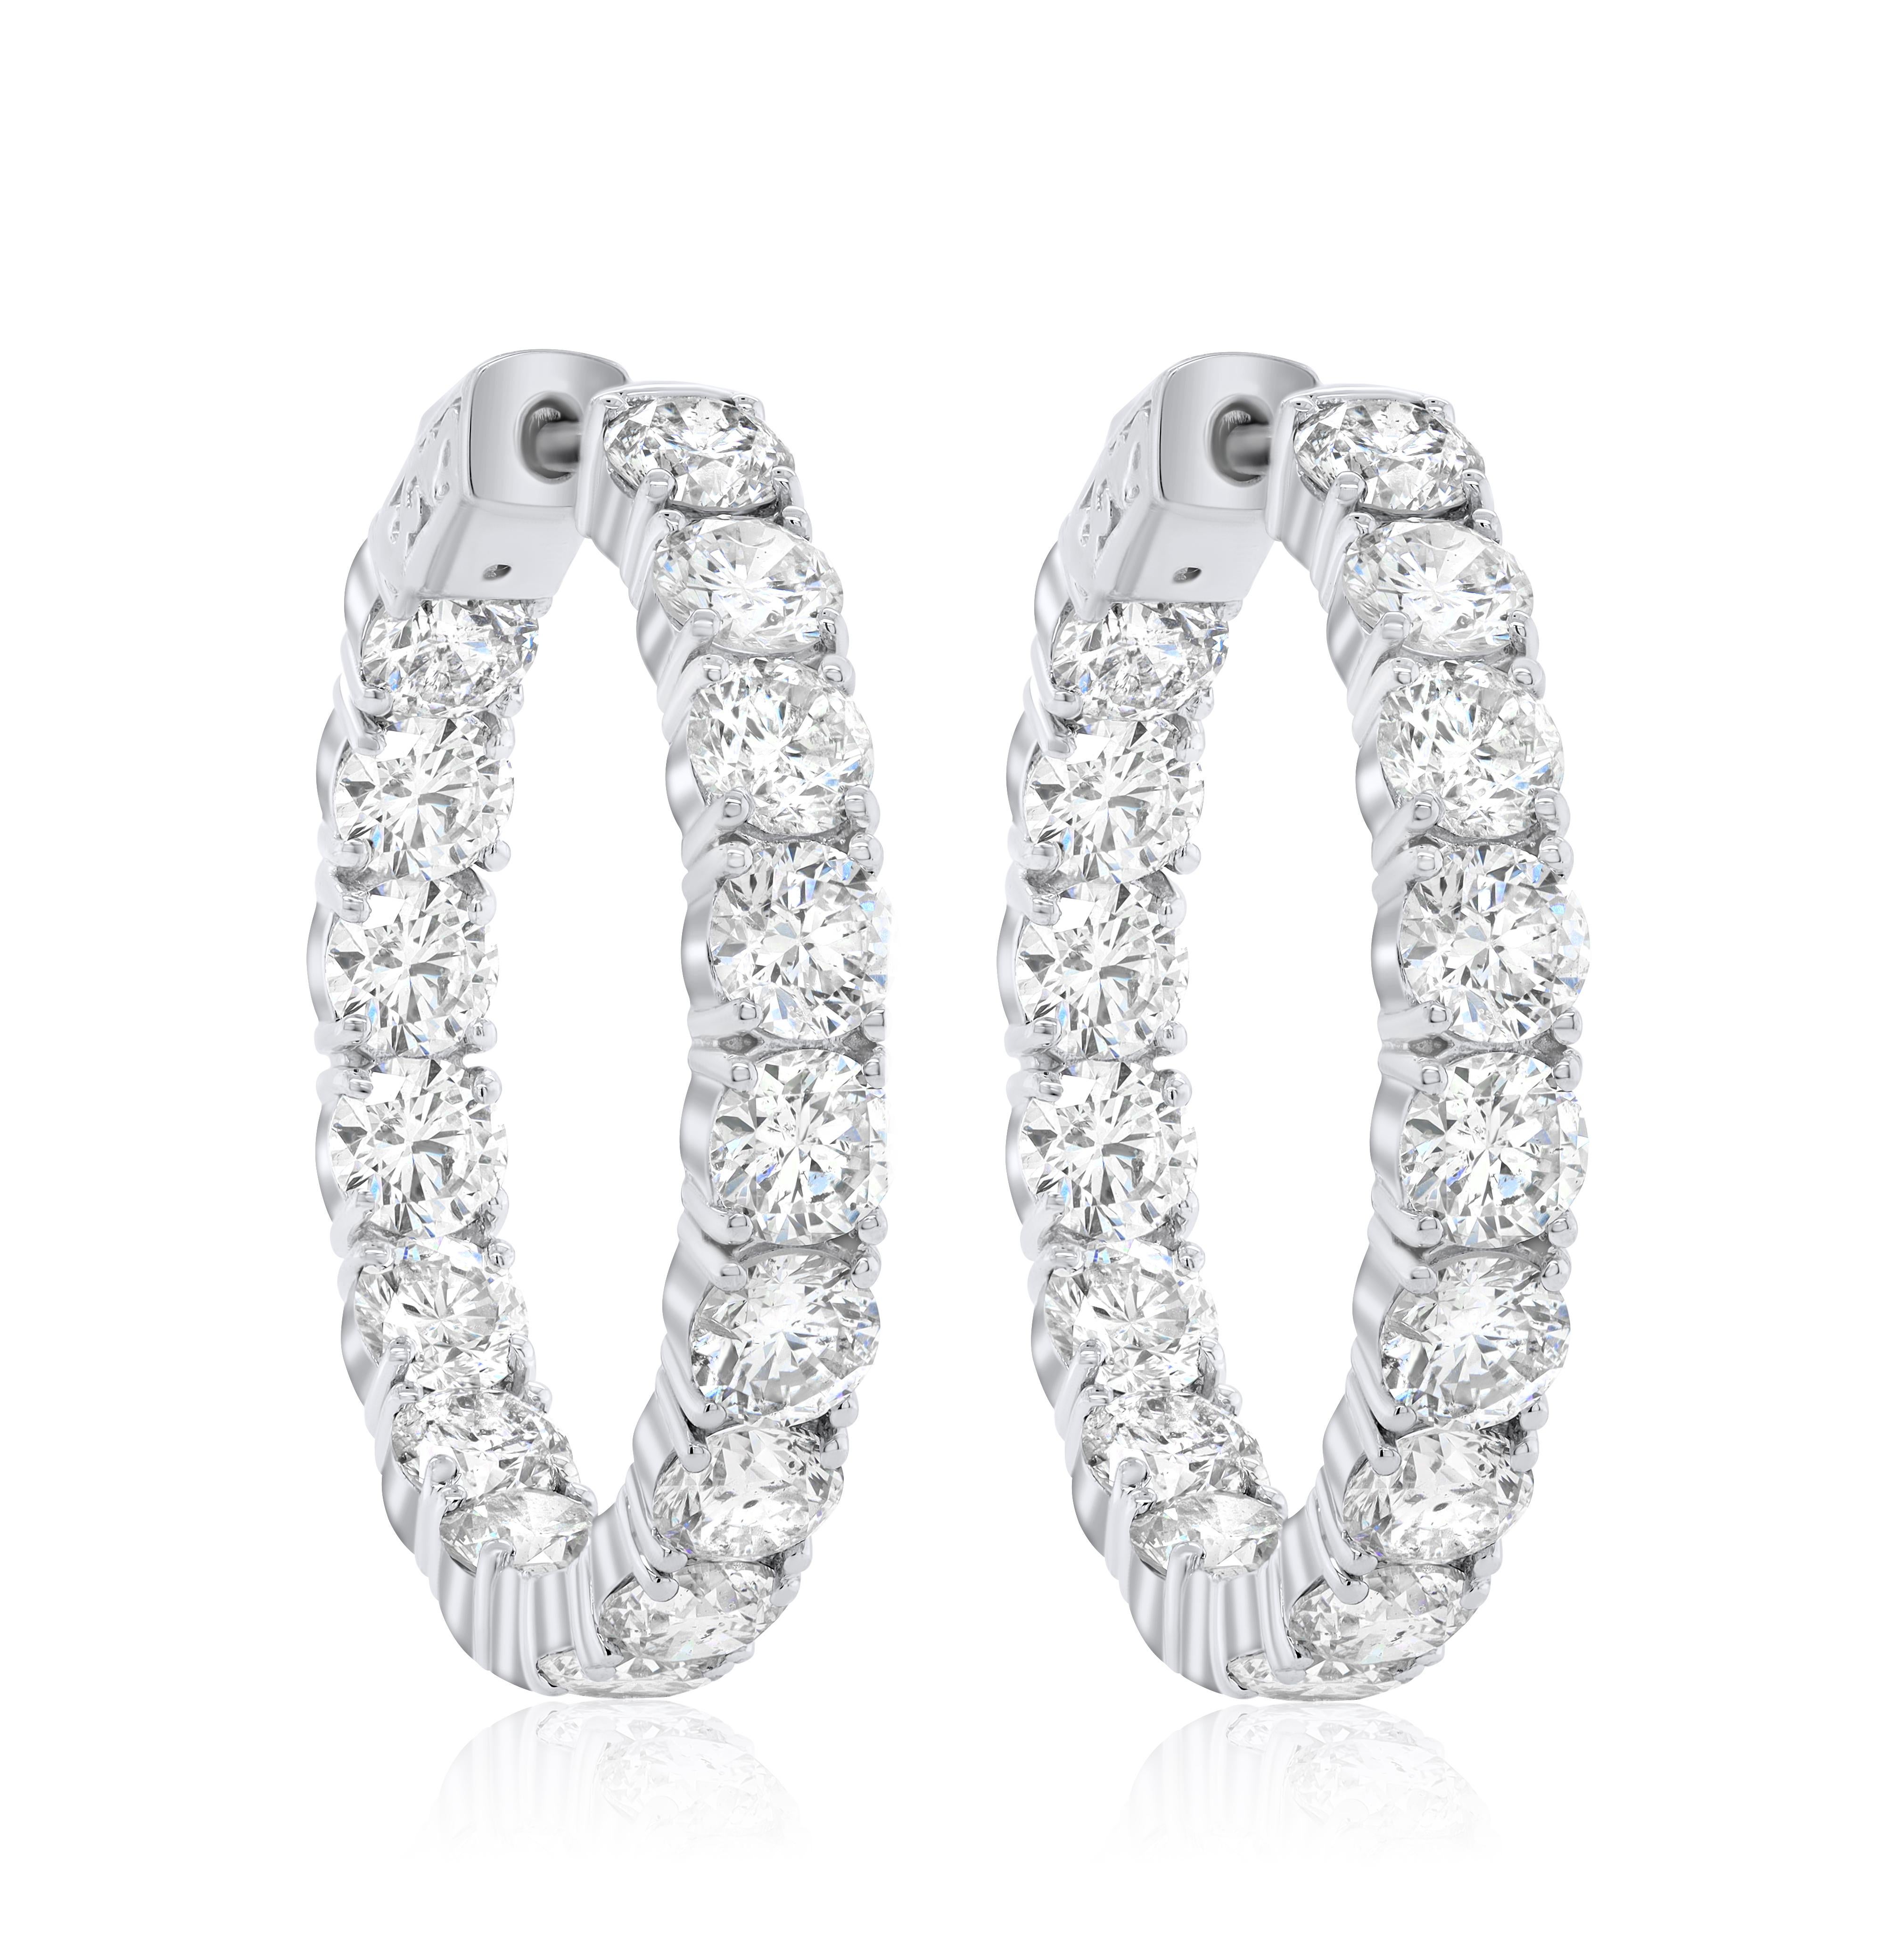 18K White Gold Diamond Earrings featuring 11.80 Carat T.W. of Natural Diamonds

Underline your look with this sharp 18K White Gold Diamond Earrings. High quality Diamonds. This Earrings will underline your exquisite look for any occasion.

. is a